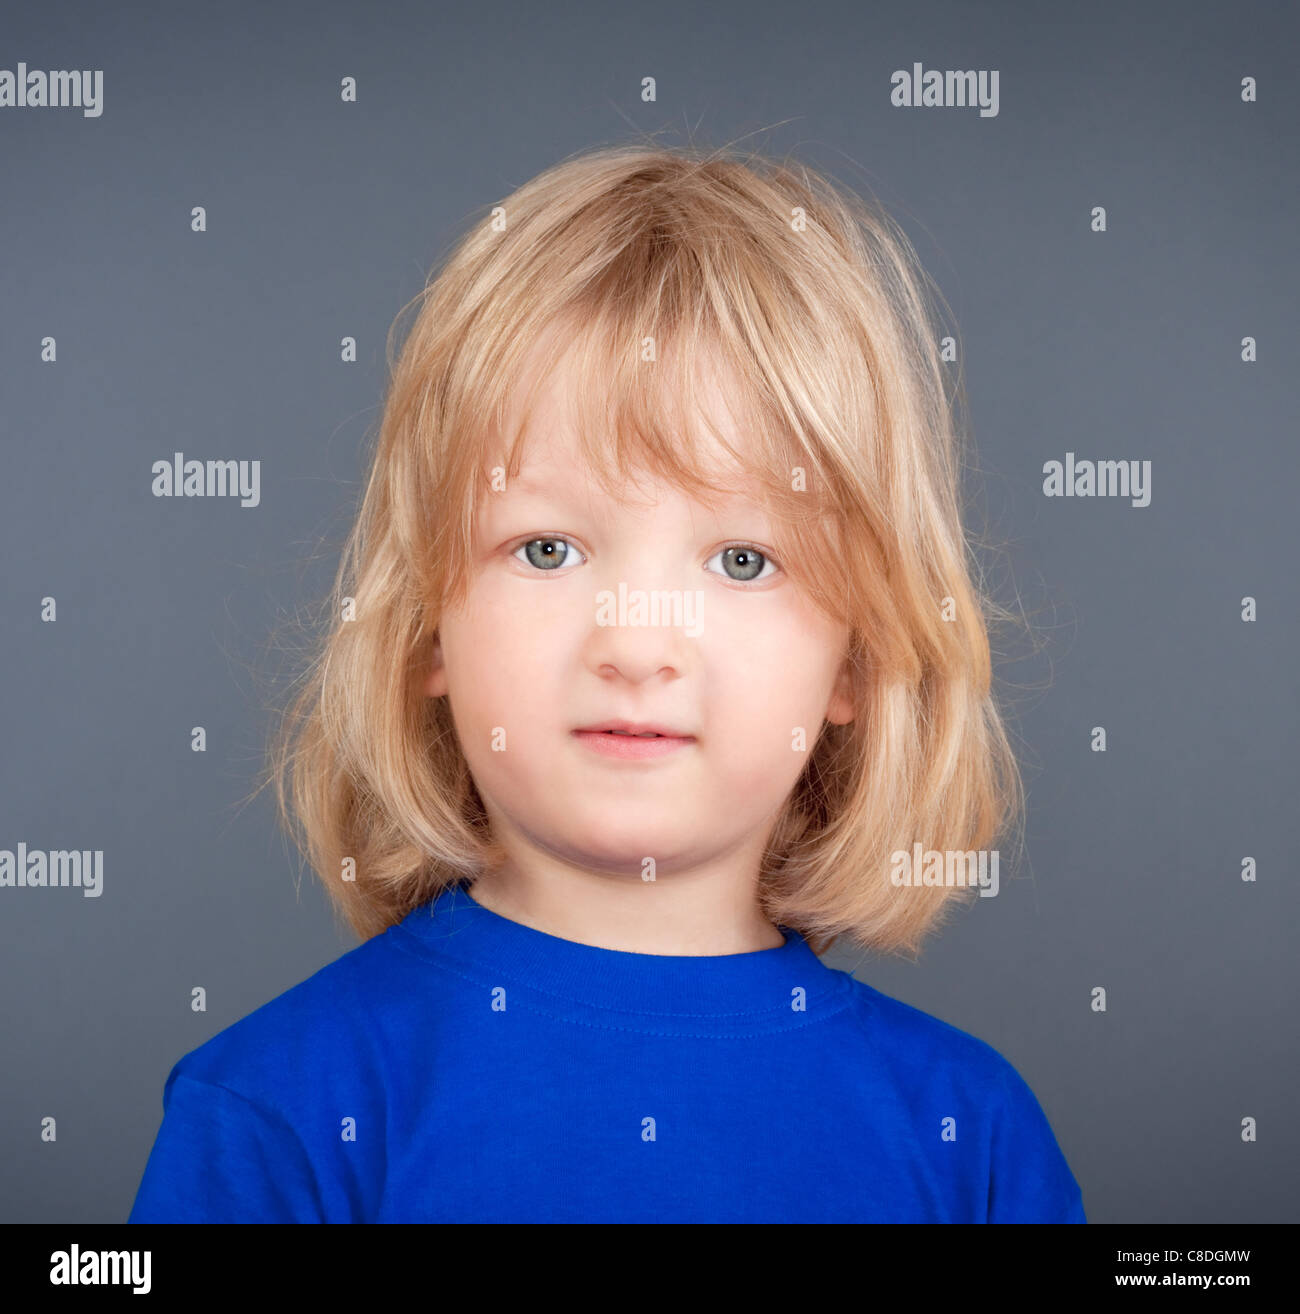 studio portrait of a boy with long blond hair - isolated on gray Stock Photo